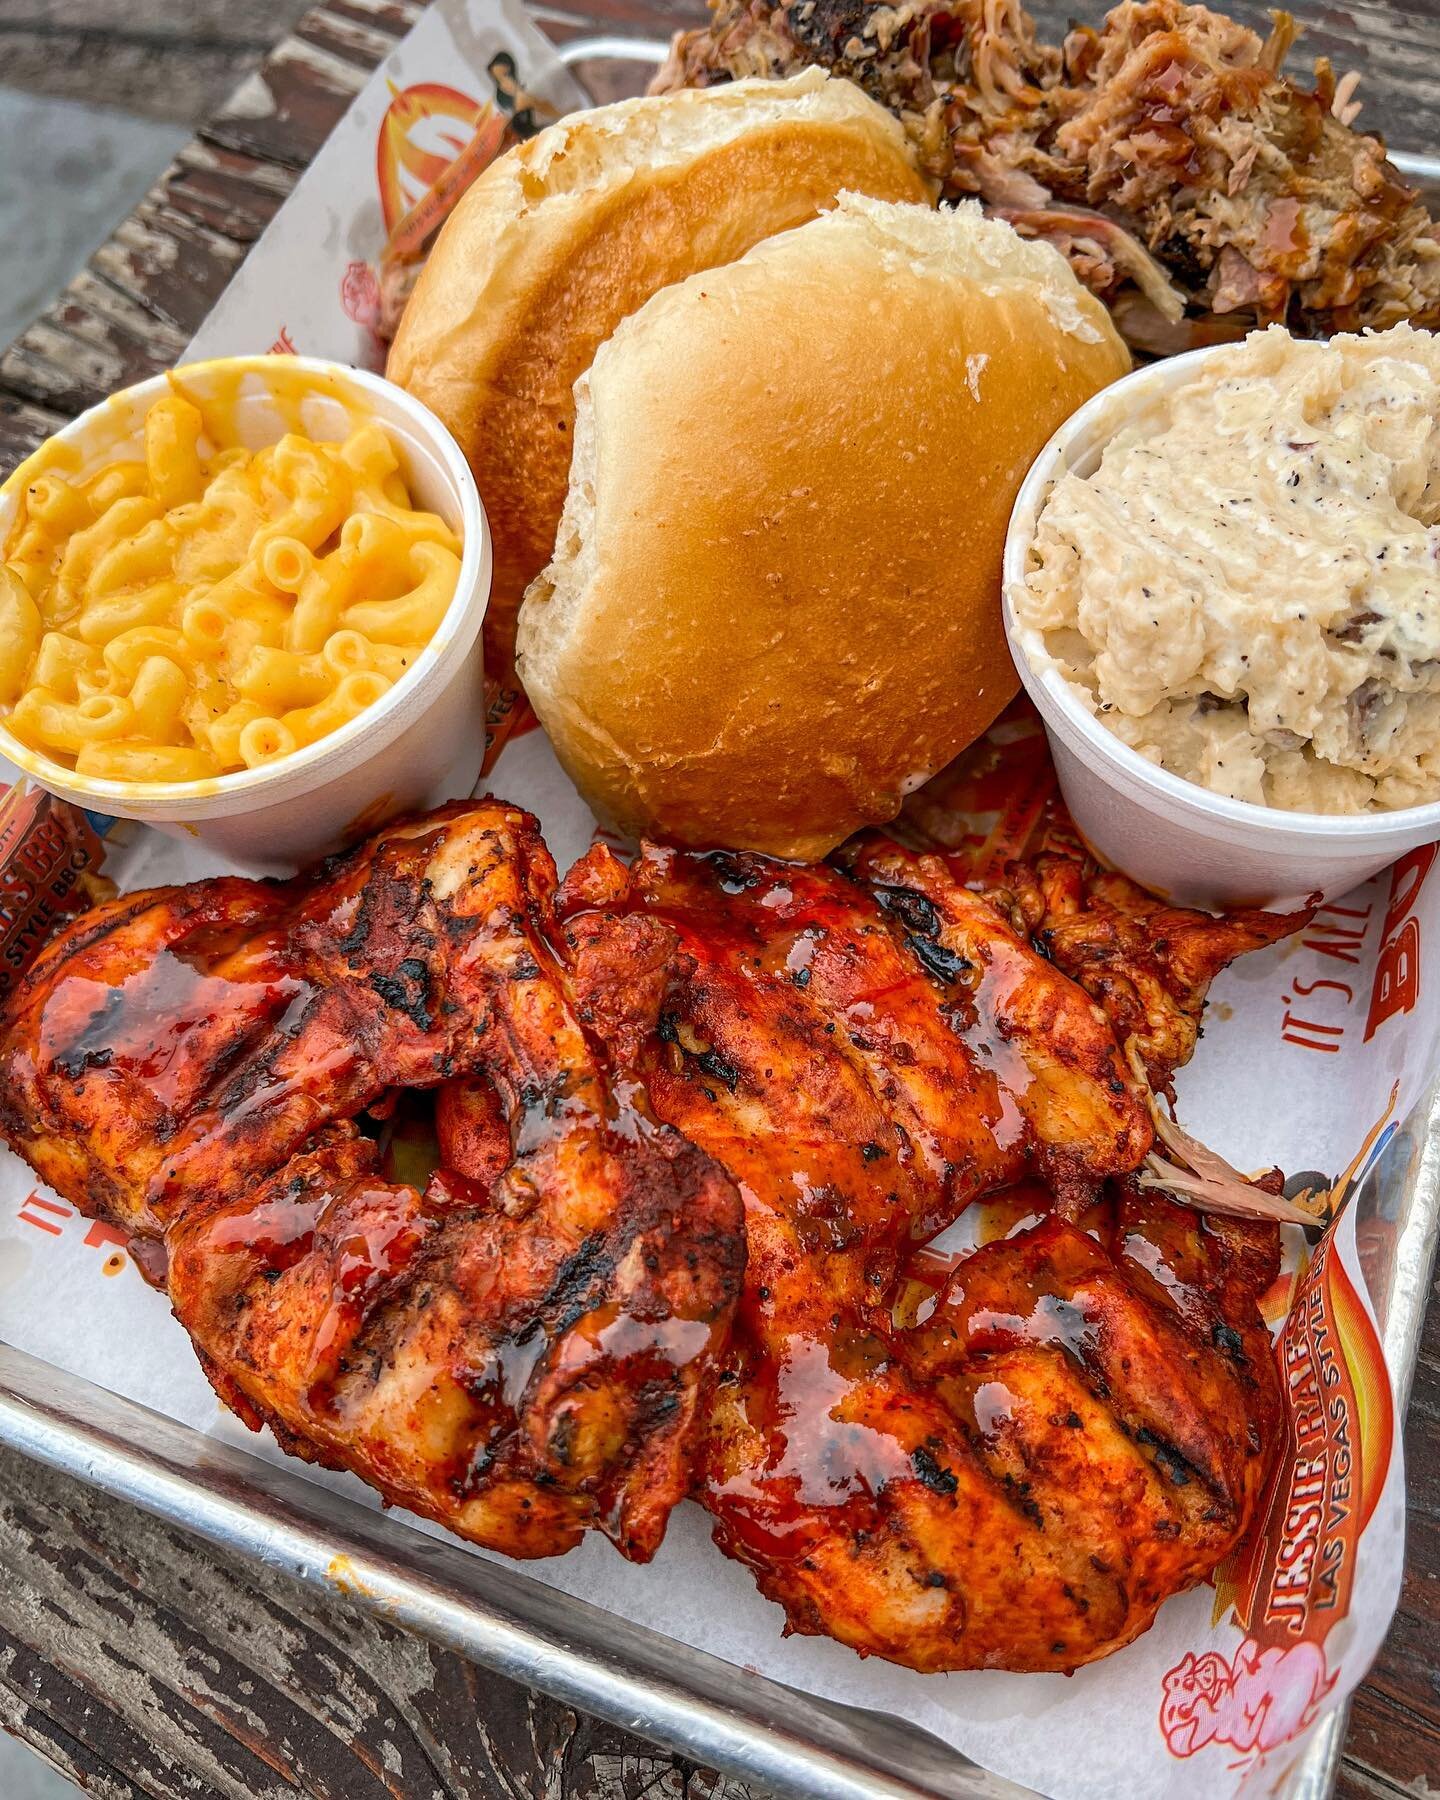 You need to add some meat to your week! 😎🔥 We have all the meat you need in HENDERSON and LAS VEGAS! 

📸 HIGH ROLLER COMBO
Smoked Chicken and Pulled Pork with BBQ Mash Potatoes and Jessie&rsquo;s Mac &amp; Cheese 

📍 🔥Jessie Rae's BBQ🔥
‼️TWO LO